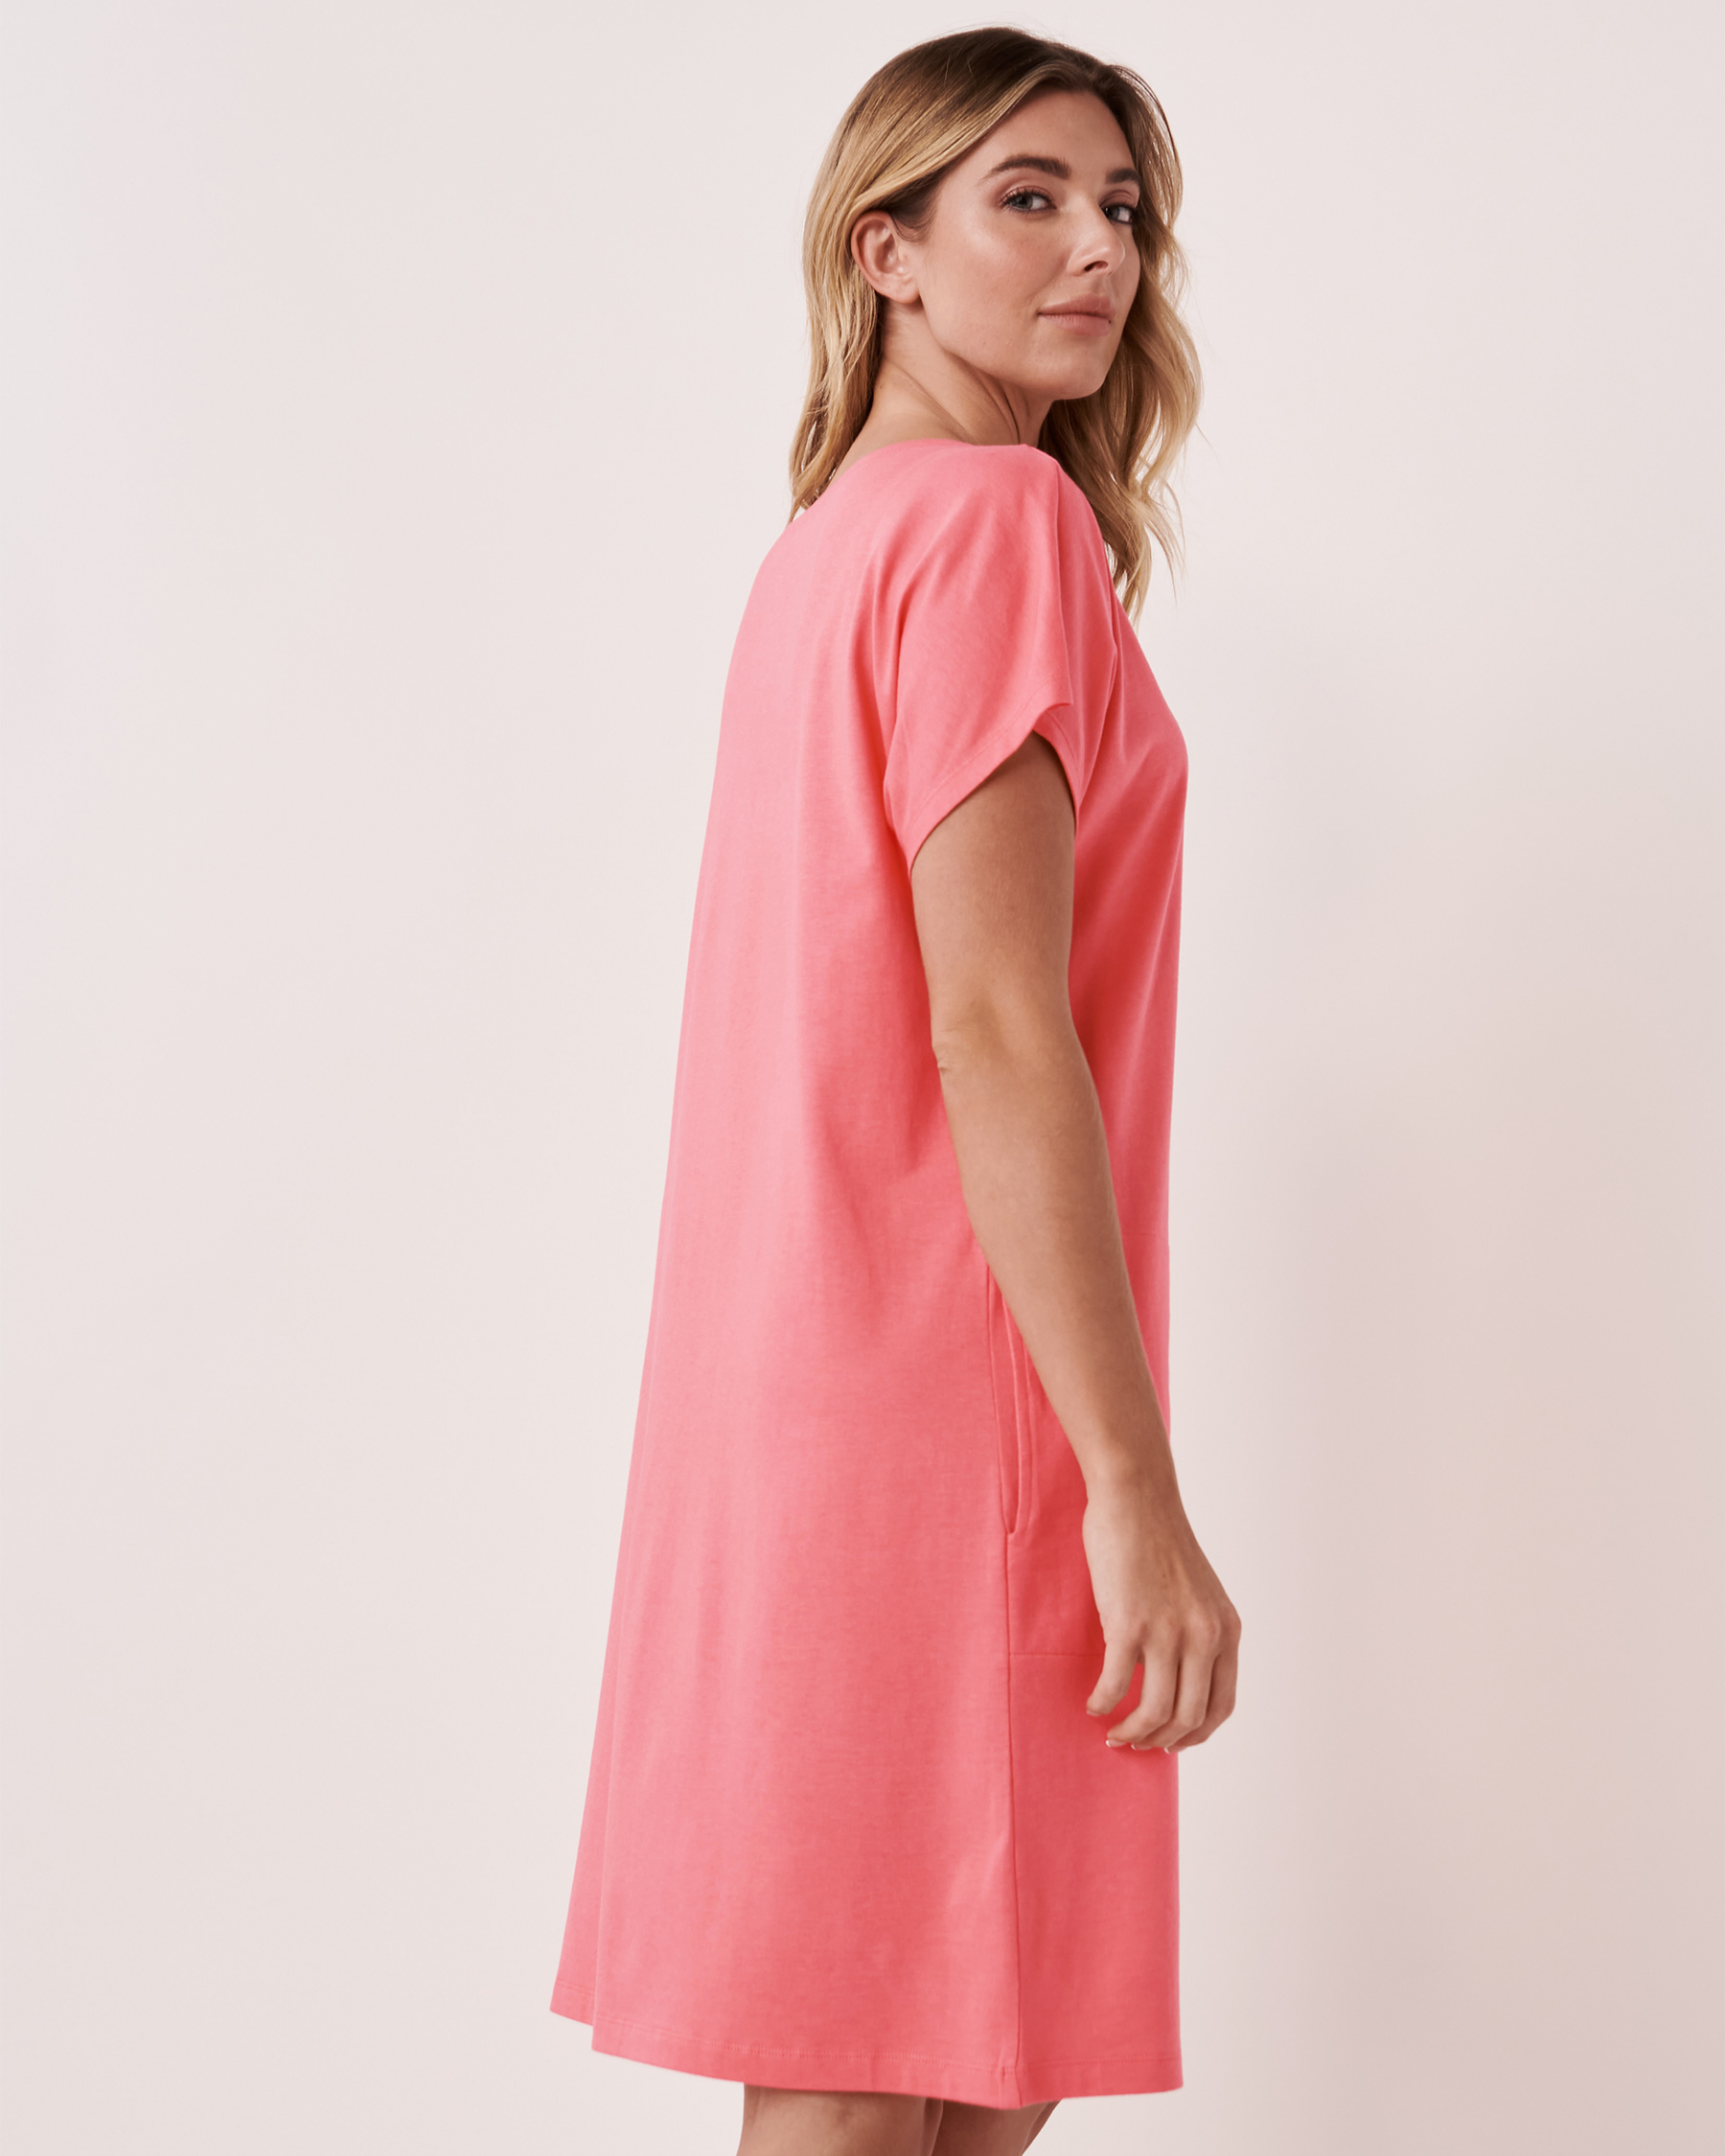 AQUAROSE Short Sleeve Dress with Pockets Shell pink 80300046 - View2